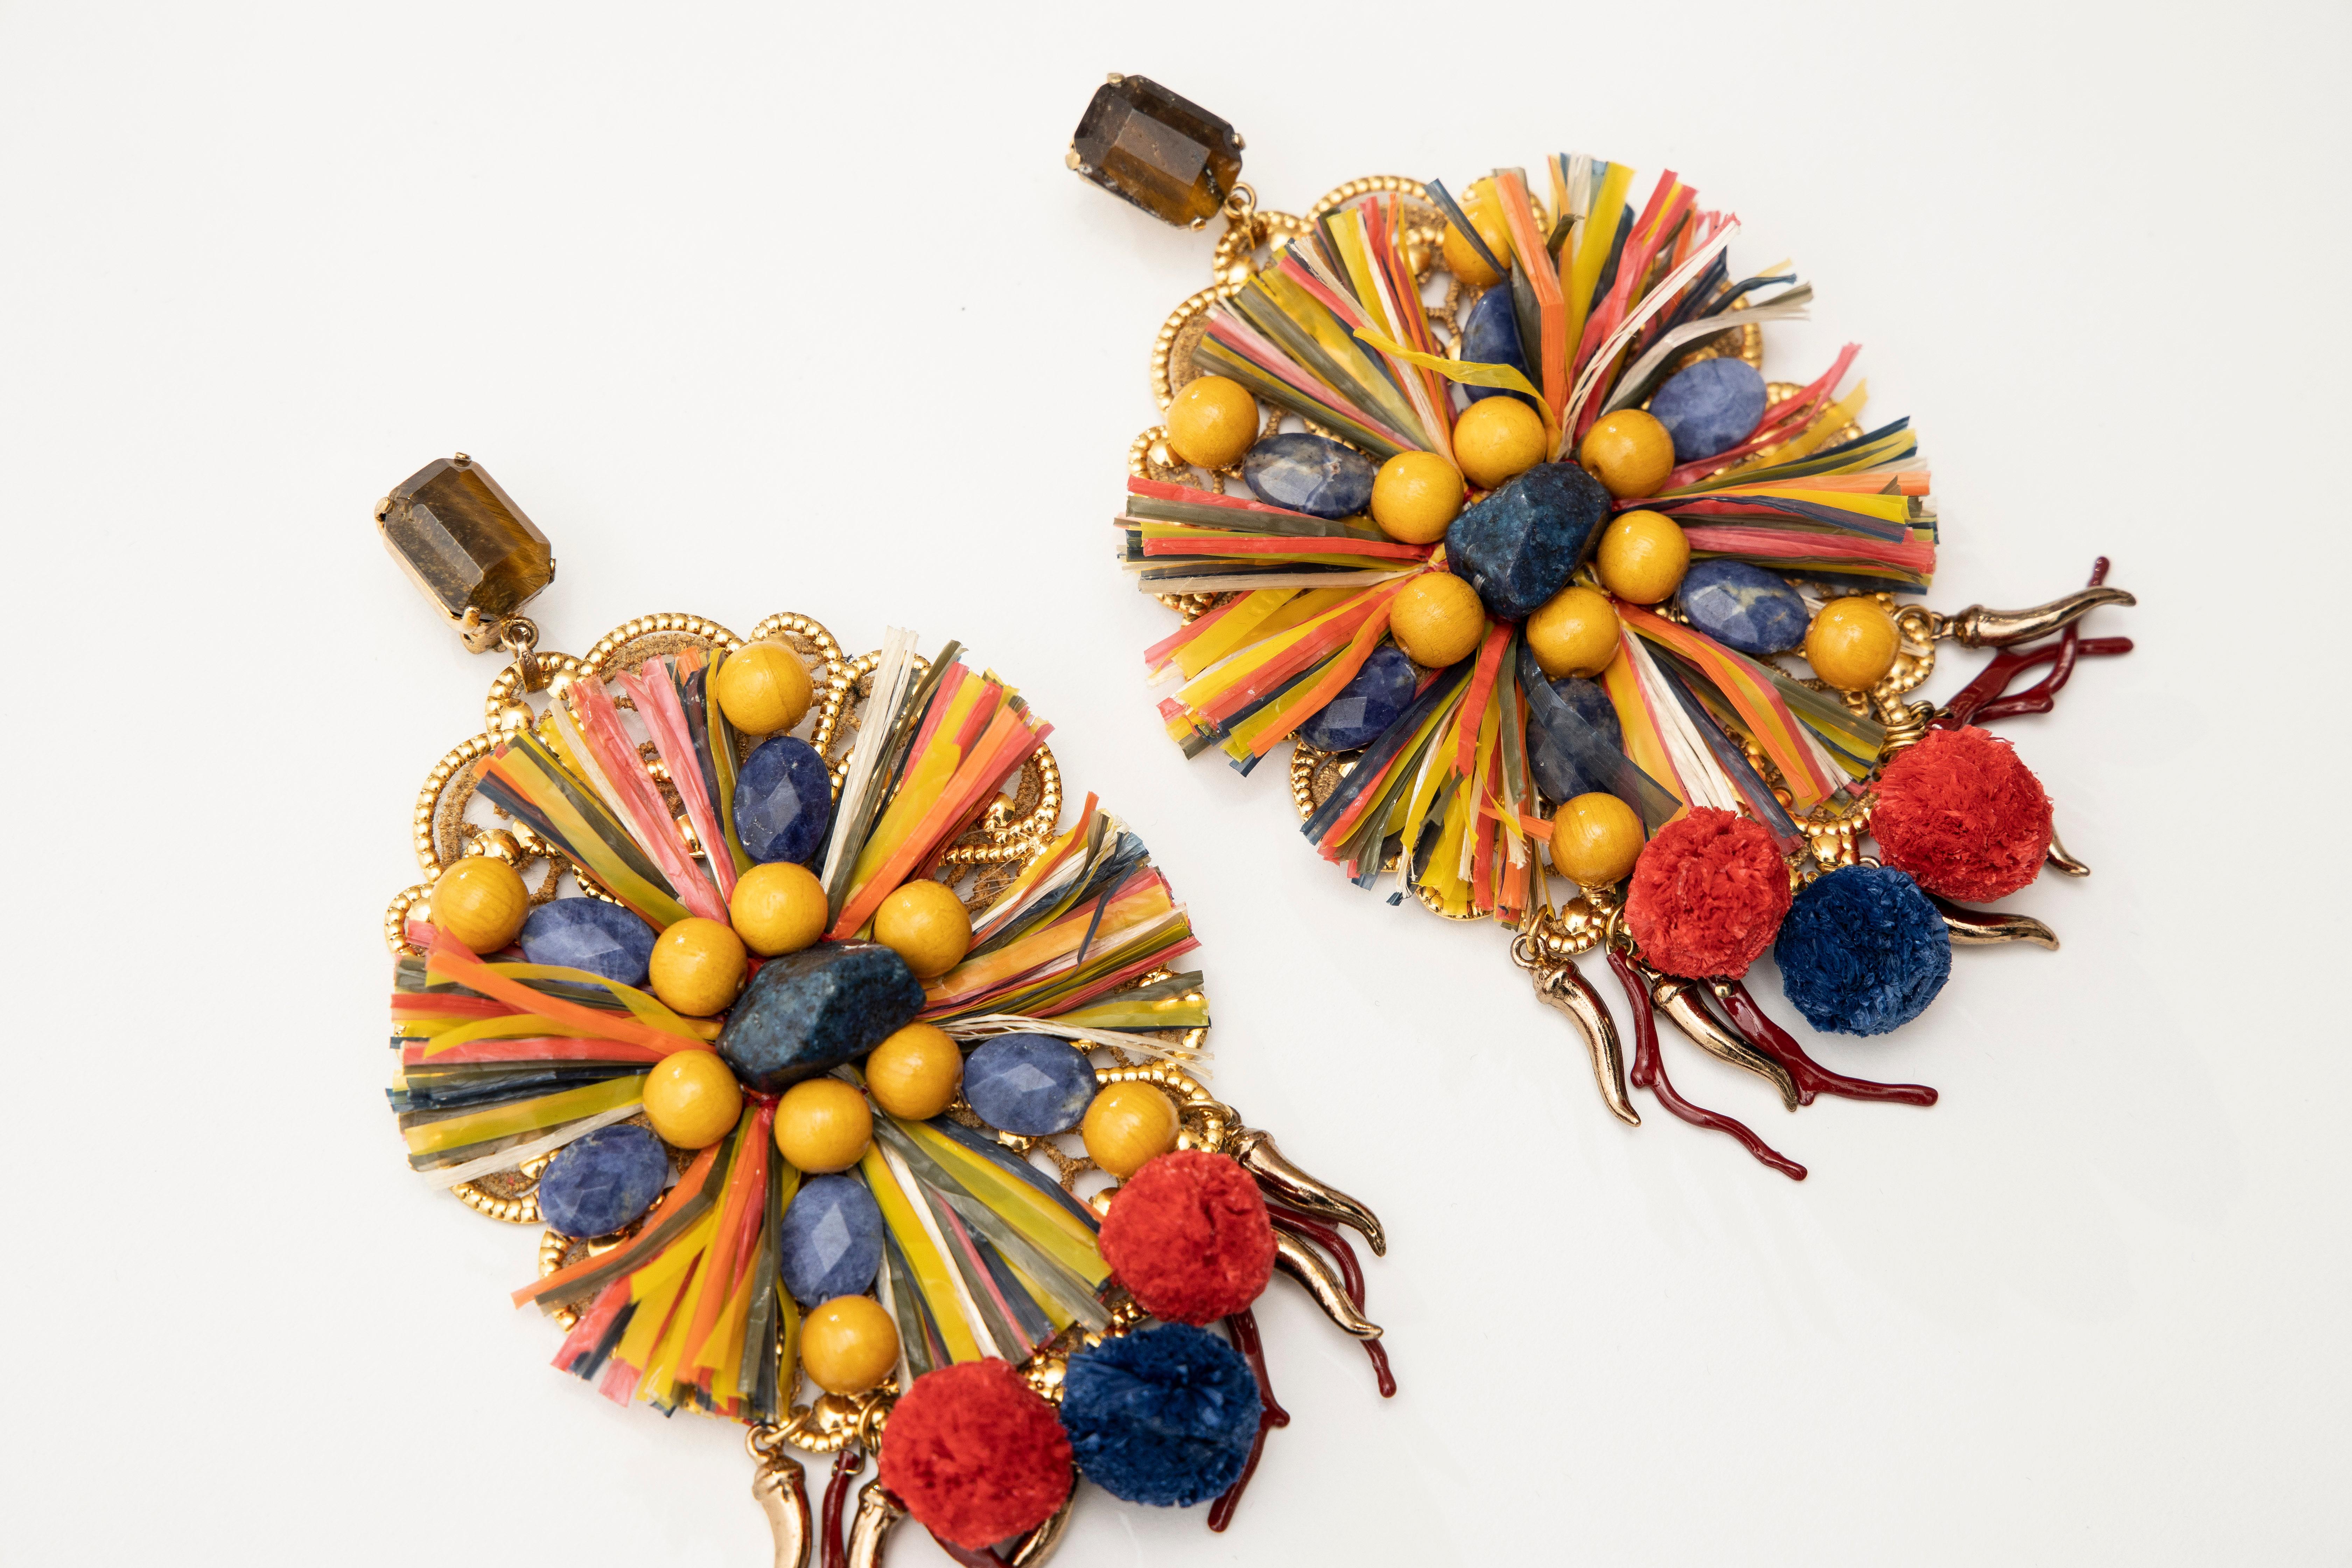  Dolce & Gabbana Runway Spring 2013 clip-on earrings with raffia fringe, pom-pom details, enamel beads, wood beads, lace backing and clip-on closures. 

Original Box &  Certificate of Authenticity